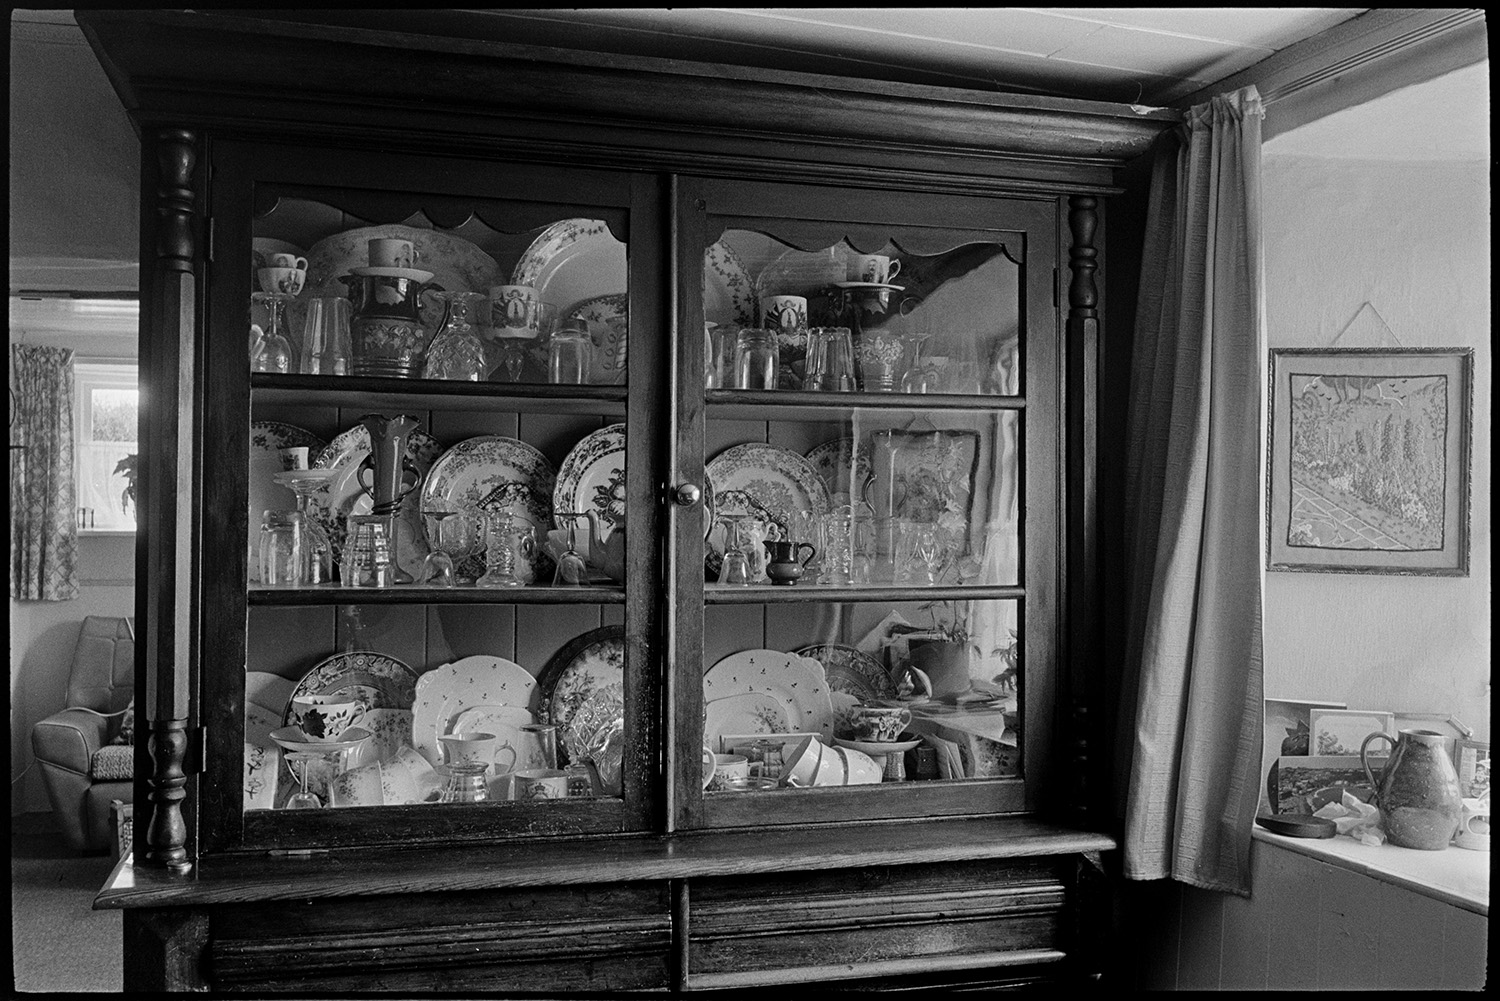 Cottage interior. Man and woman seated by open fire reading, dresser with china, side table.
[The interior of Edith Crocker and Henry Crocker's cottage at Monkokehampton, showing a large dresser with glass doors. It is full of china, plates, crockery and glassware. There is a curtain and window ledge beside it, and another window and armchair in the room behind.]